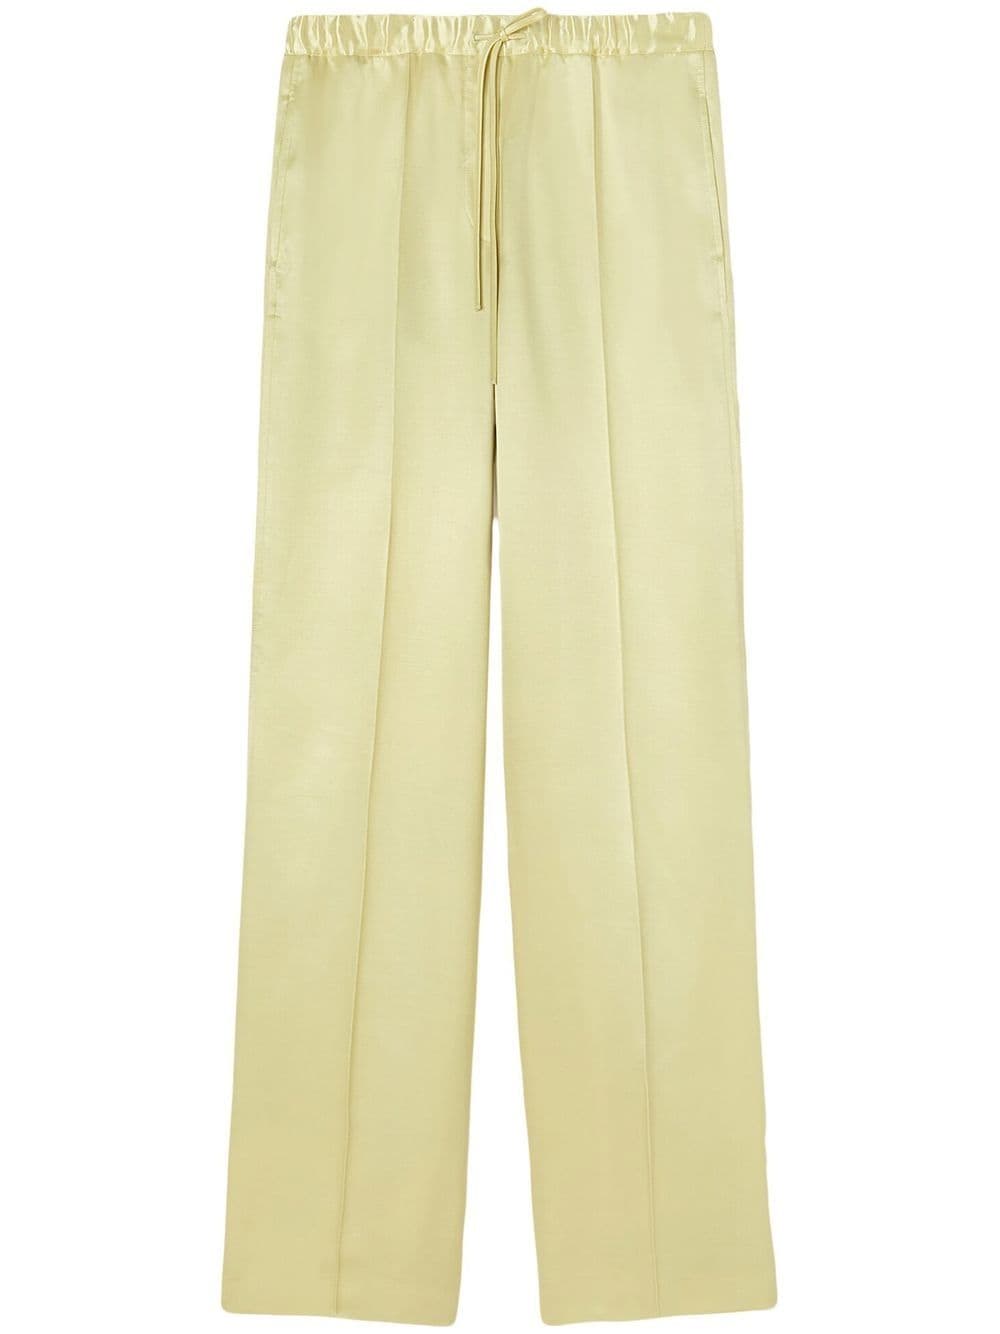 Image 1 of Jil Sander glossy-finish trousers